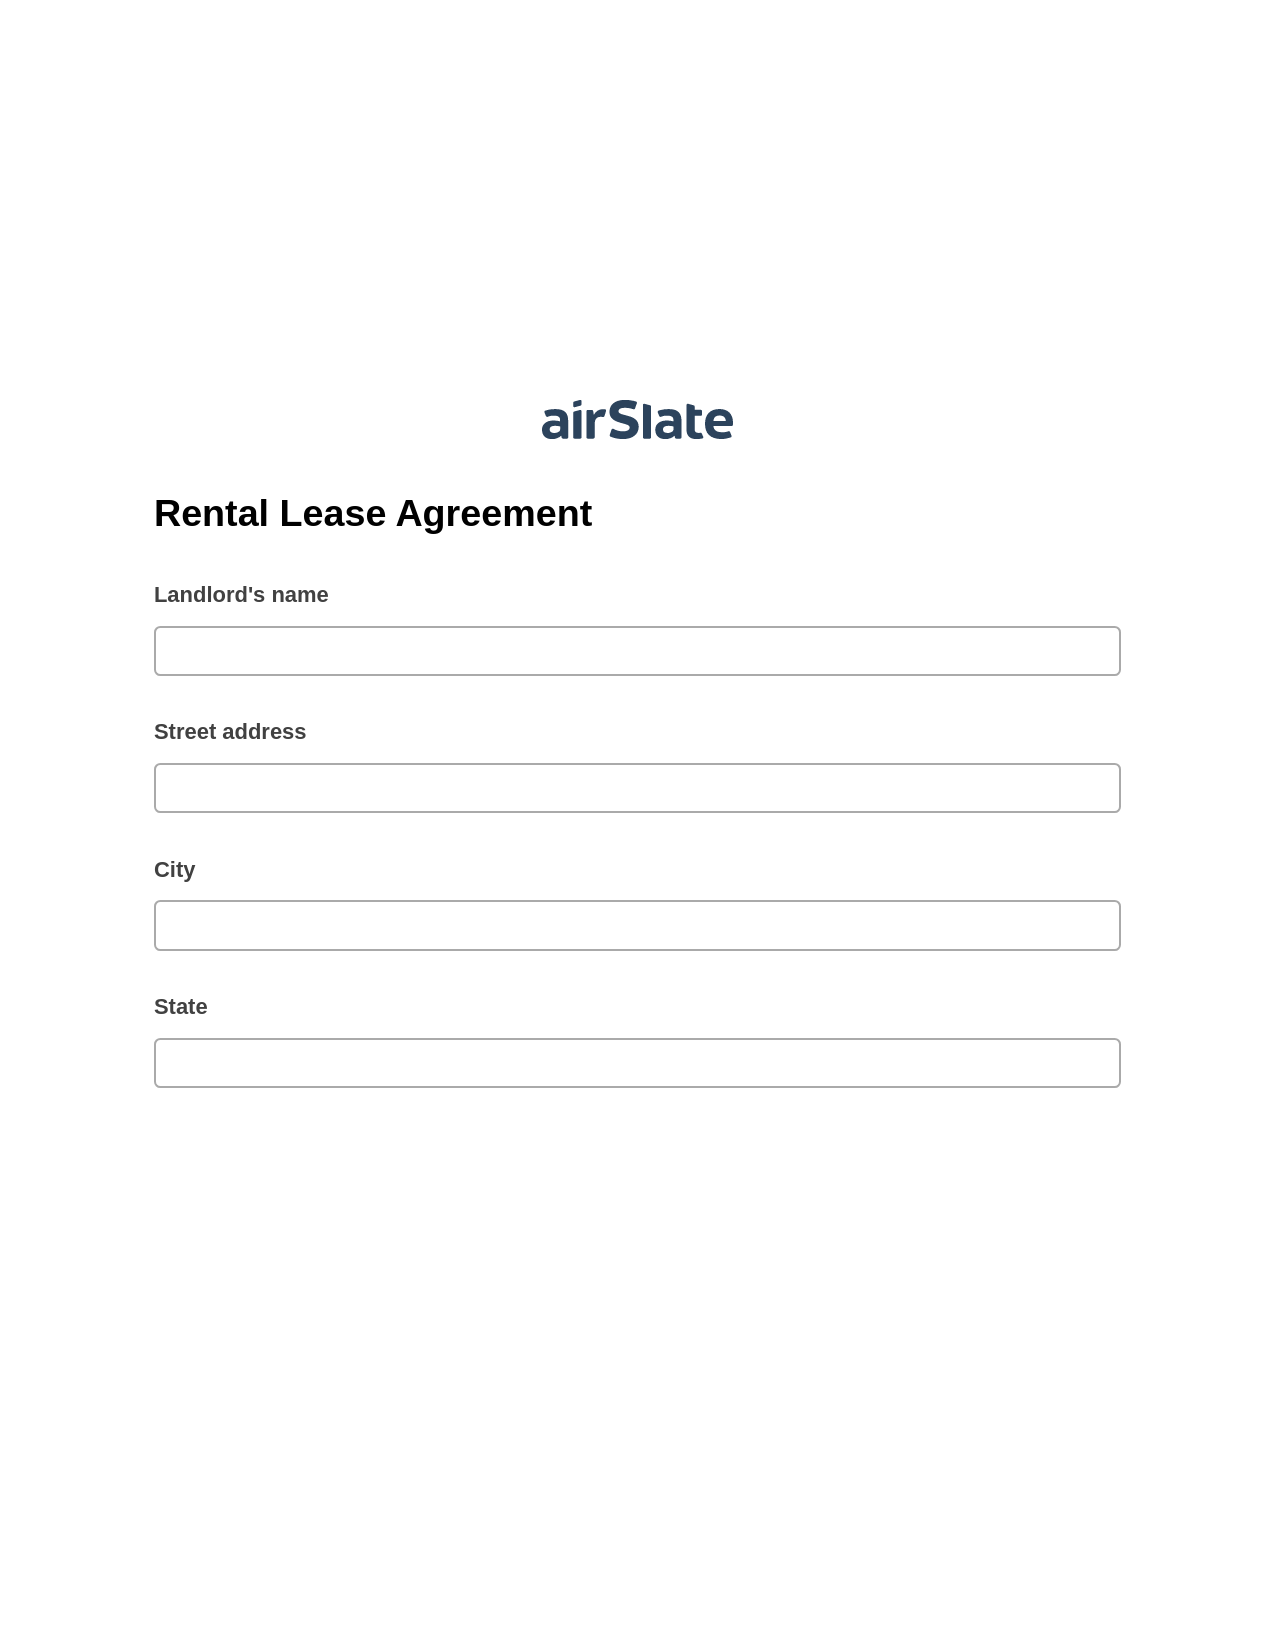 Multirole Rental Lease Agreement Pre-fill from Excel Spreadsheet Dropdown Options Bot, In-person Signing Bot, Box Bot